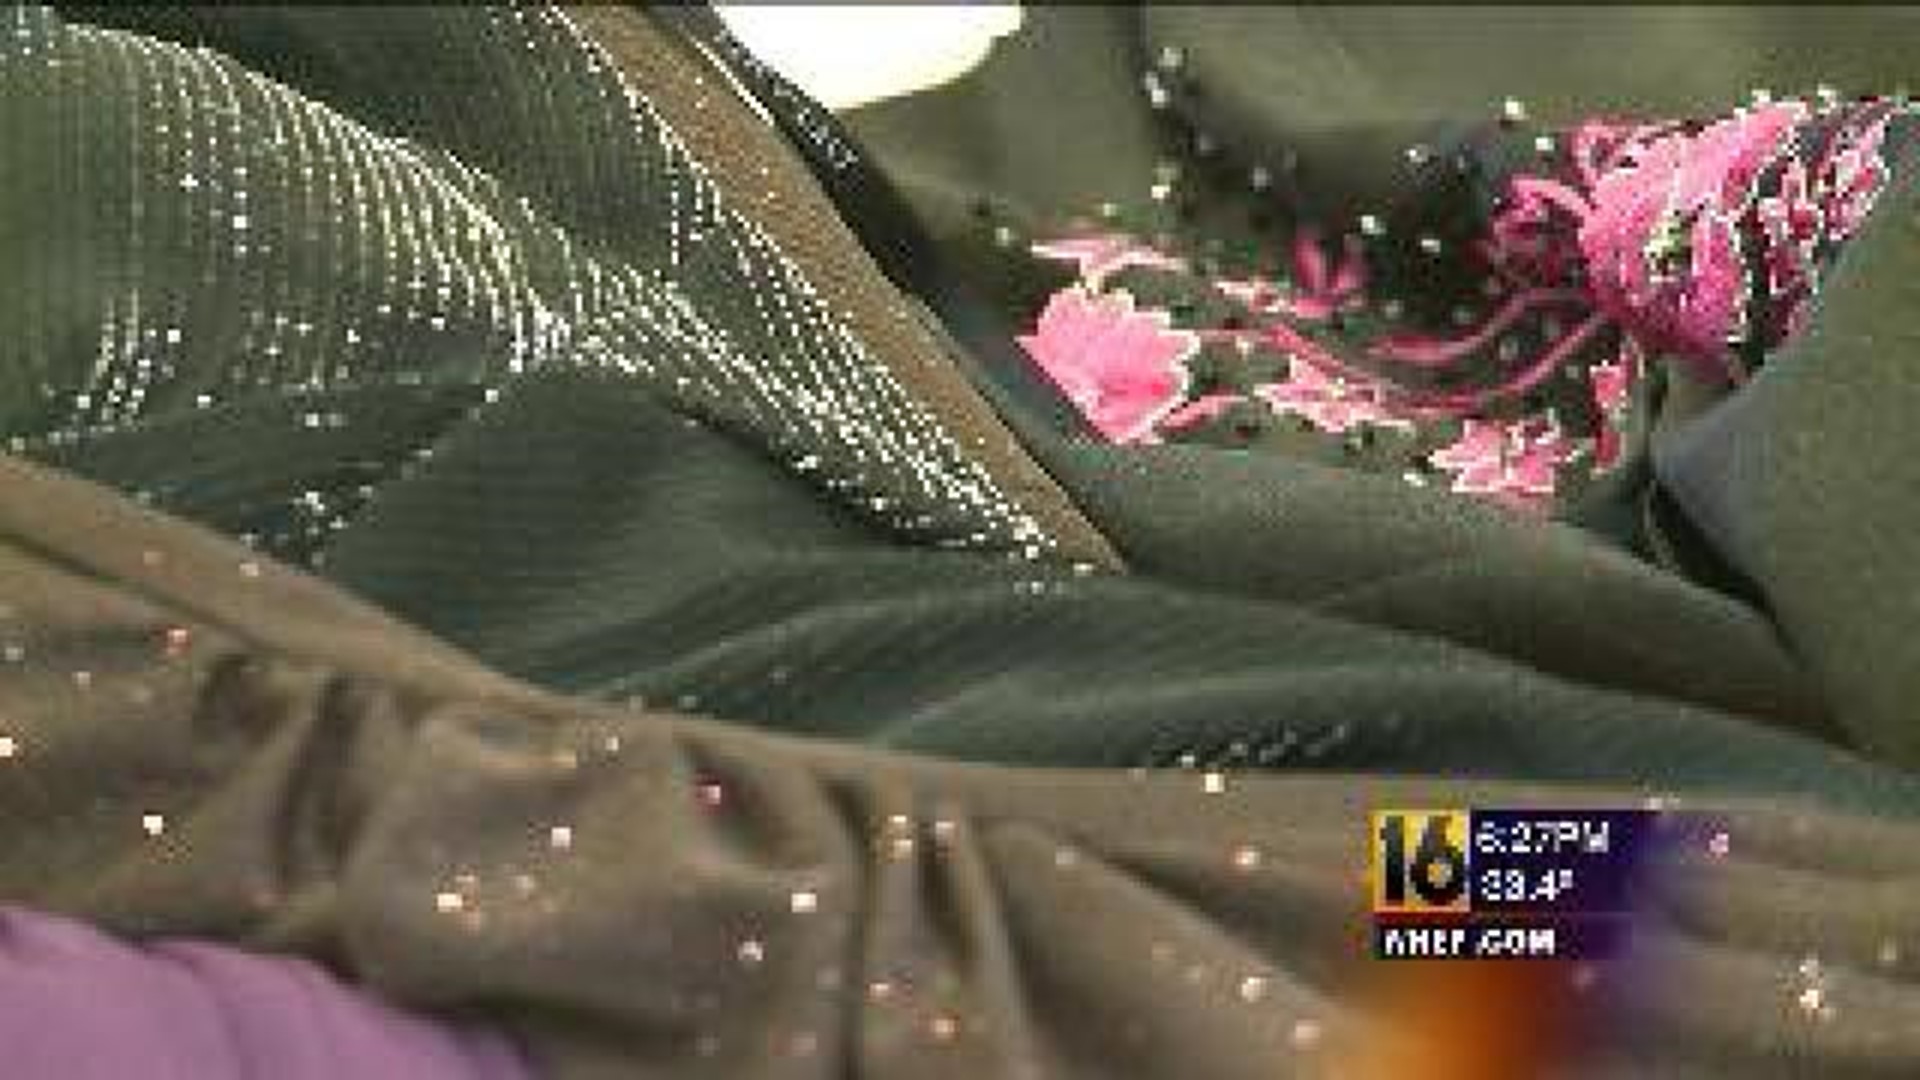 Prom Dresses Donated to Help Teens